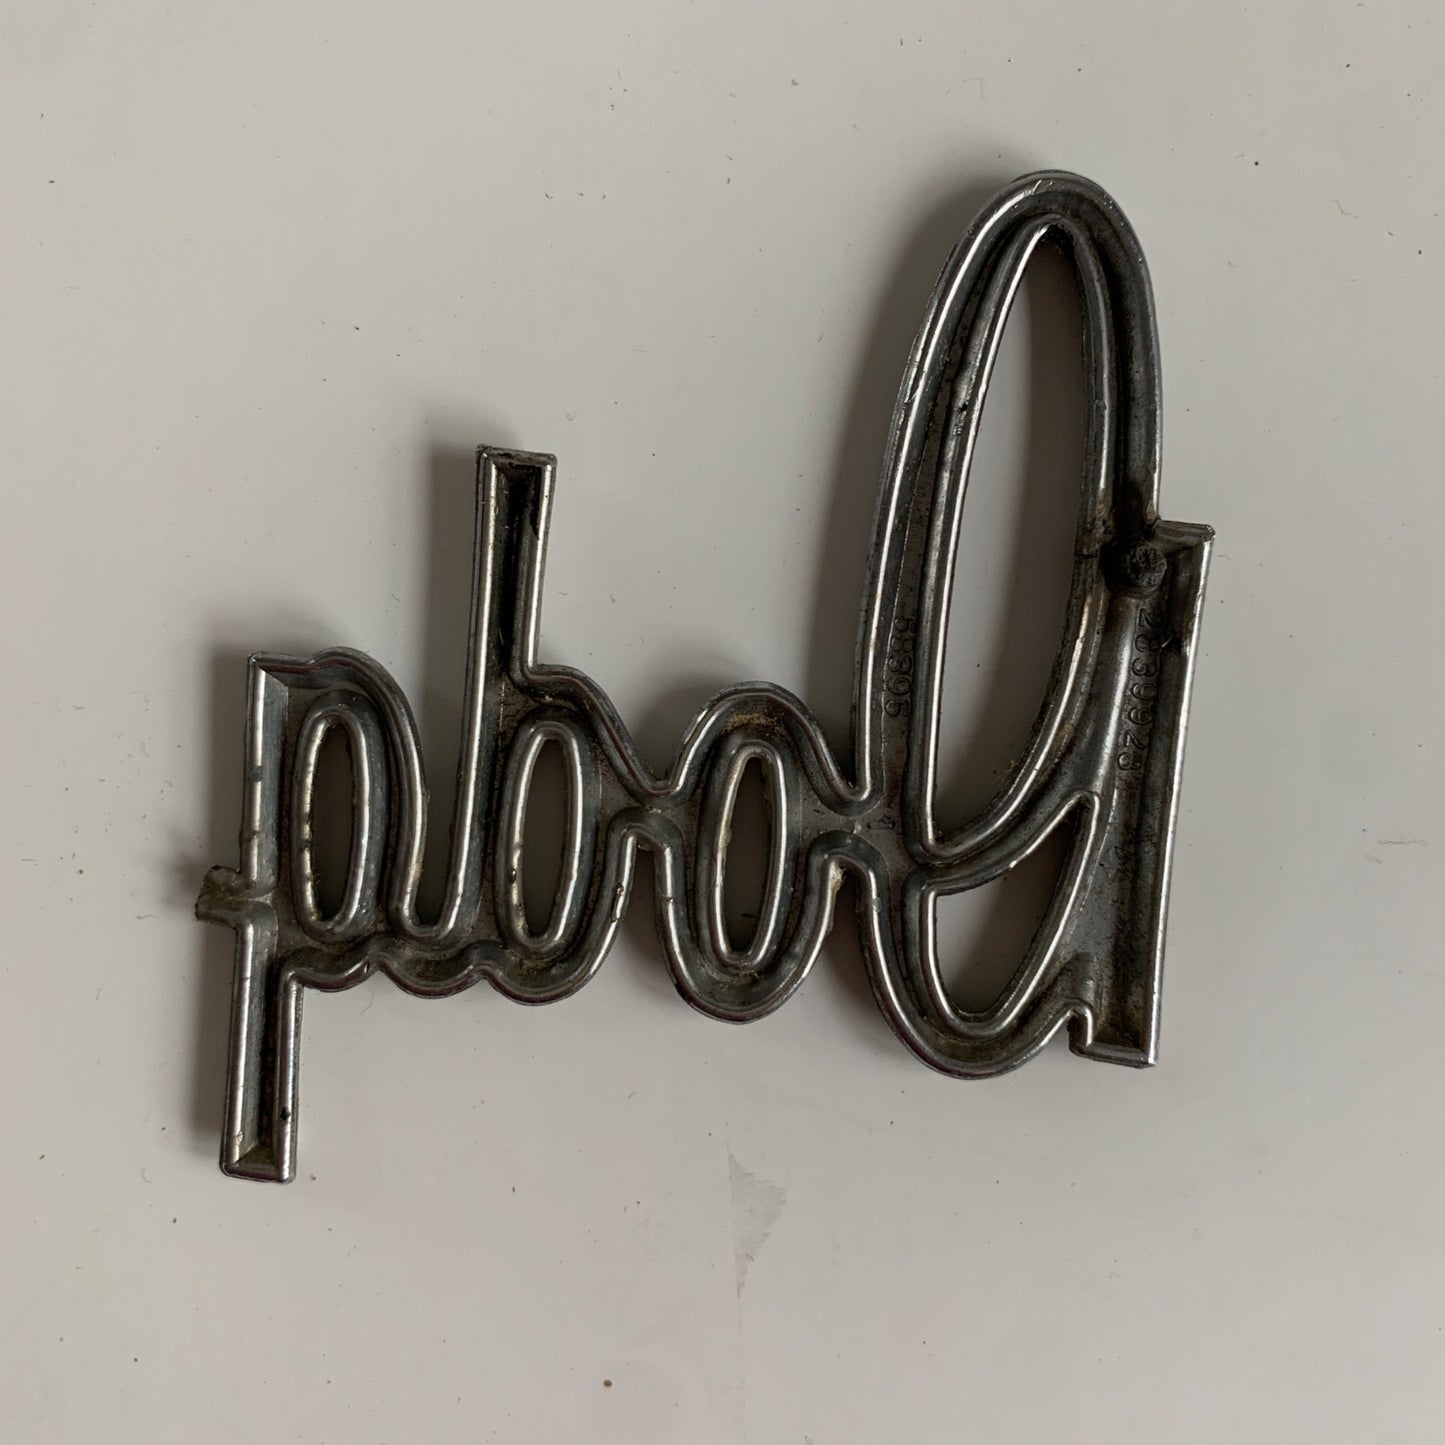 Vintage Dodge Emblem FOR PARTS OR REPAIR - WITHOUT THE "E"